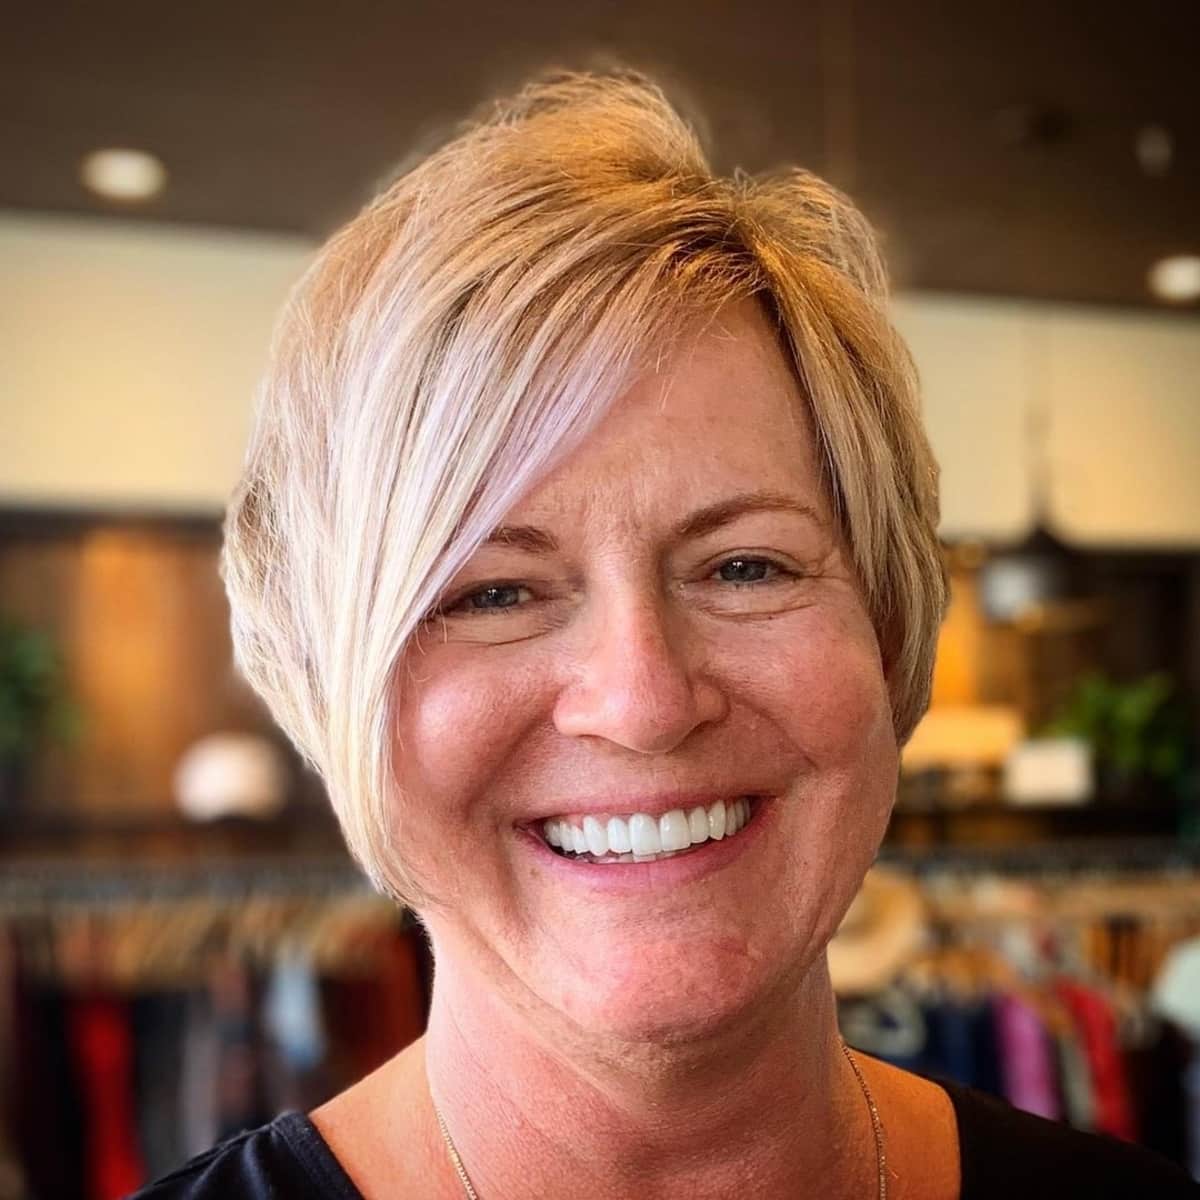 asymmetrical haircut with layering for women in their 60s with fine hair